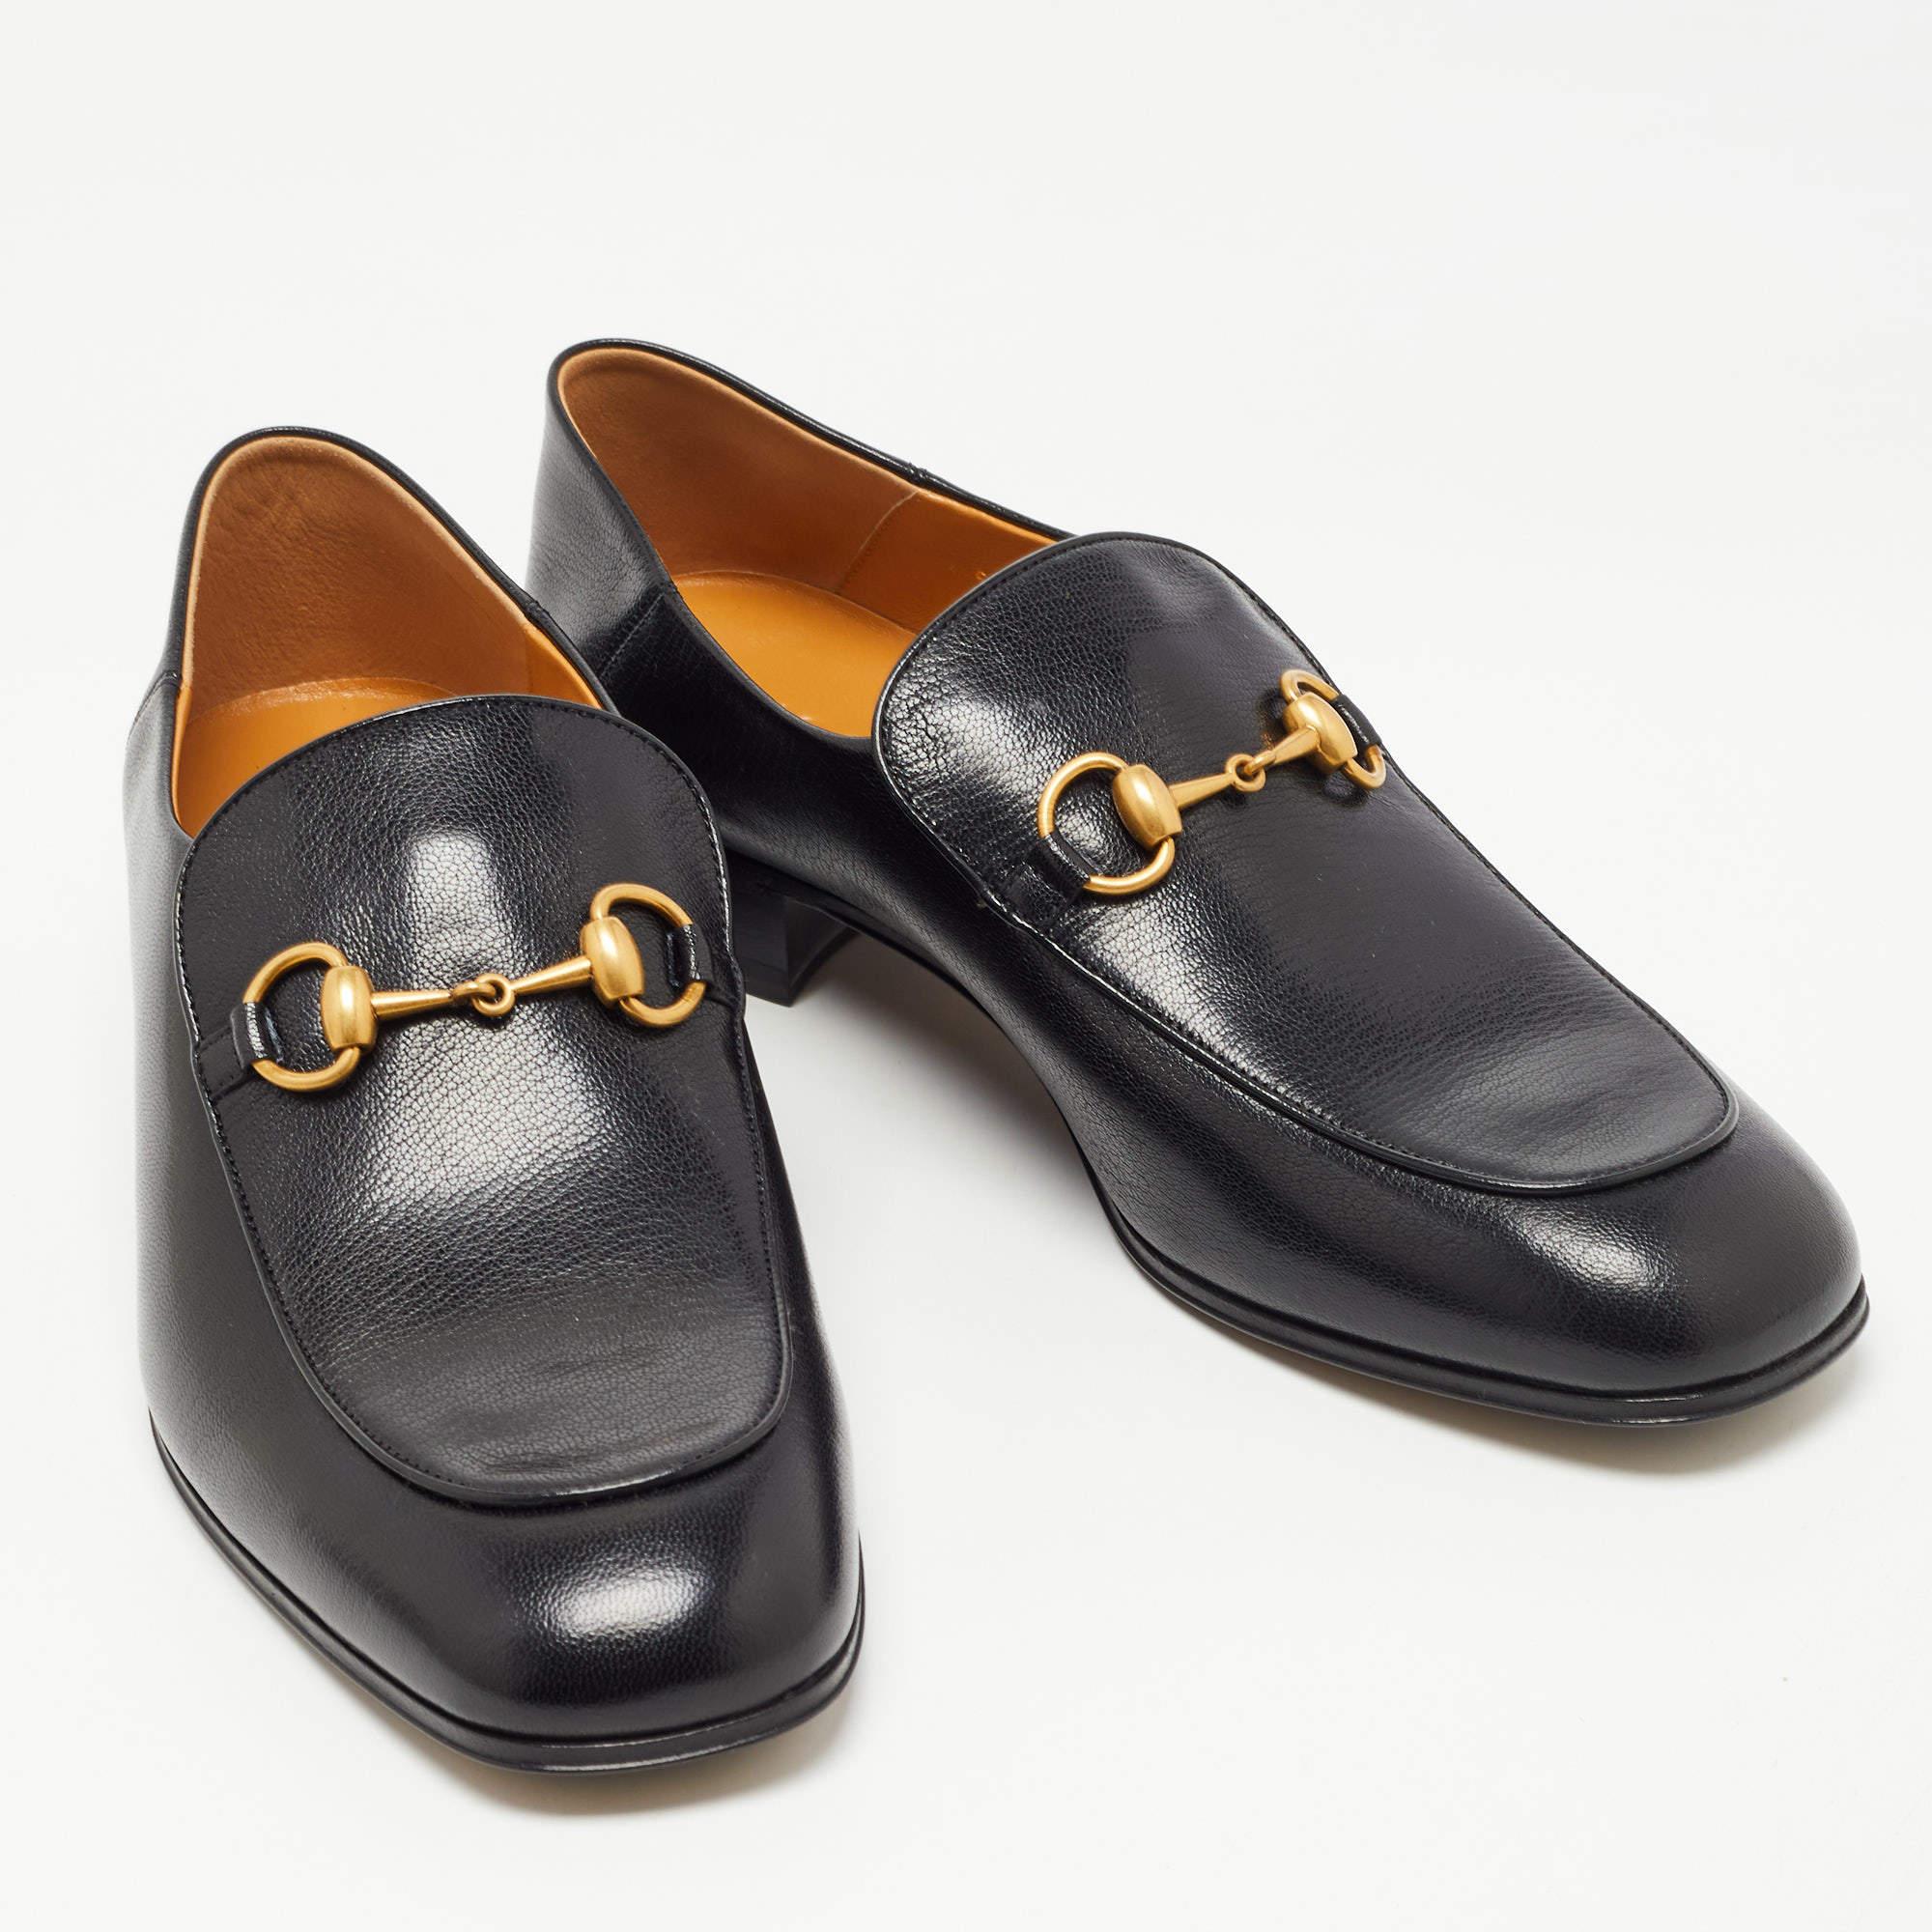 Gucci Black Leather Jordaan Loafers Size 43 1